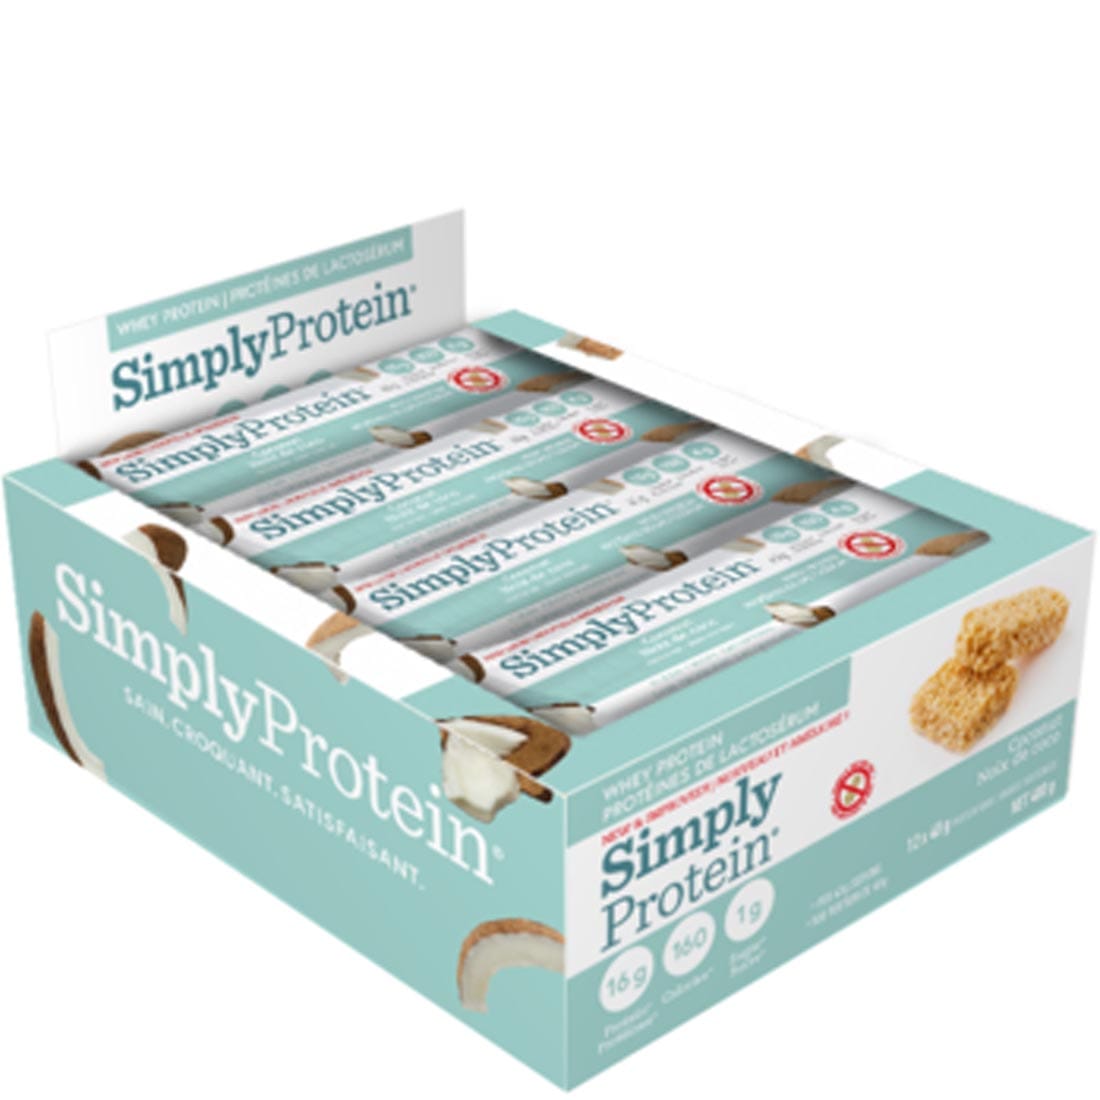 Simply Protein Whey Protein Bars (Gluten-Free), 12 x 40g